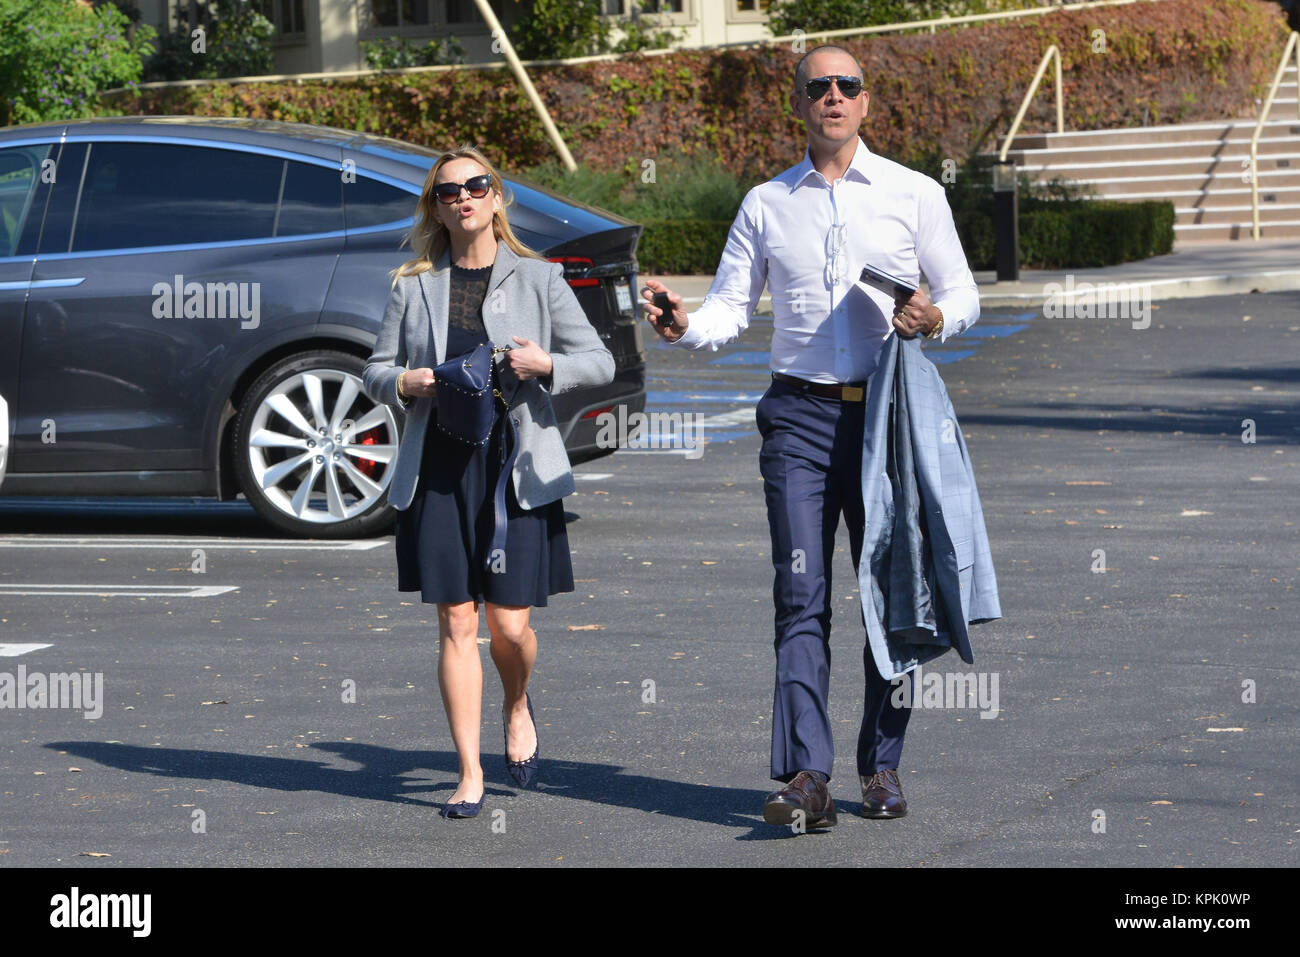 Reese Witherspoon and Jim Toth attend an event at their son's school  Featuring: Reese Witherspoon, Jim Toth Where: Pacific Palisades, California, United States When: 14 Nov 2017 Credit: WENN.com Stock Photo